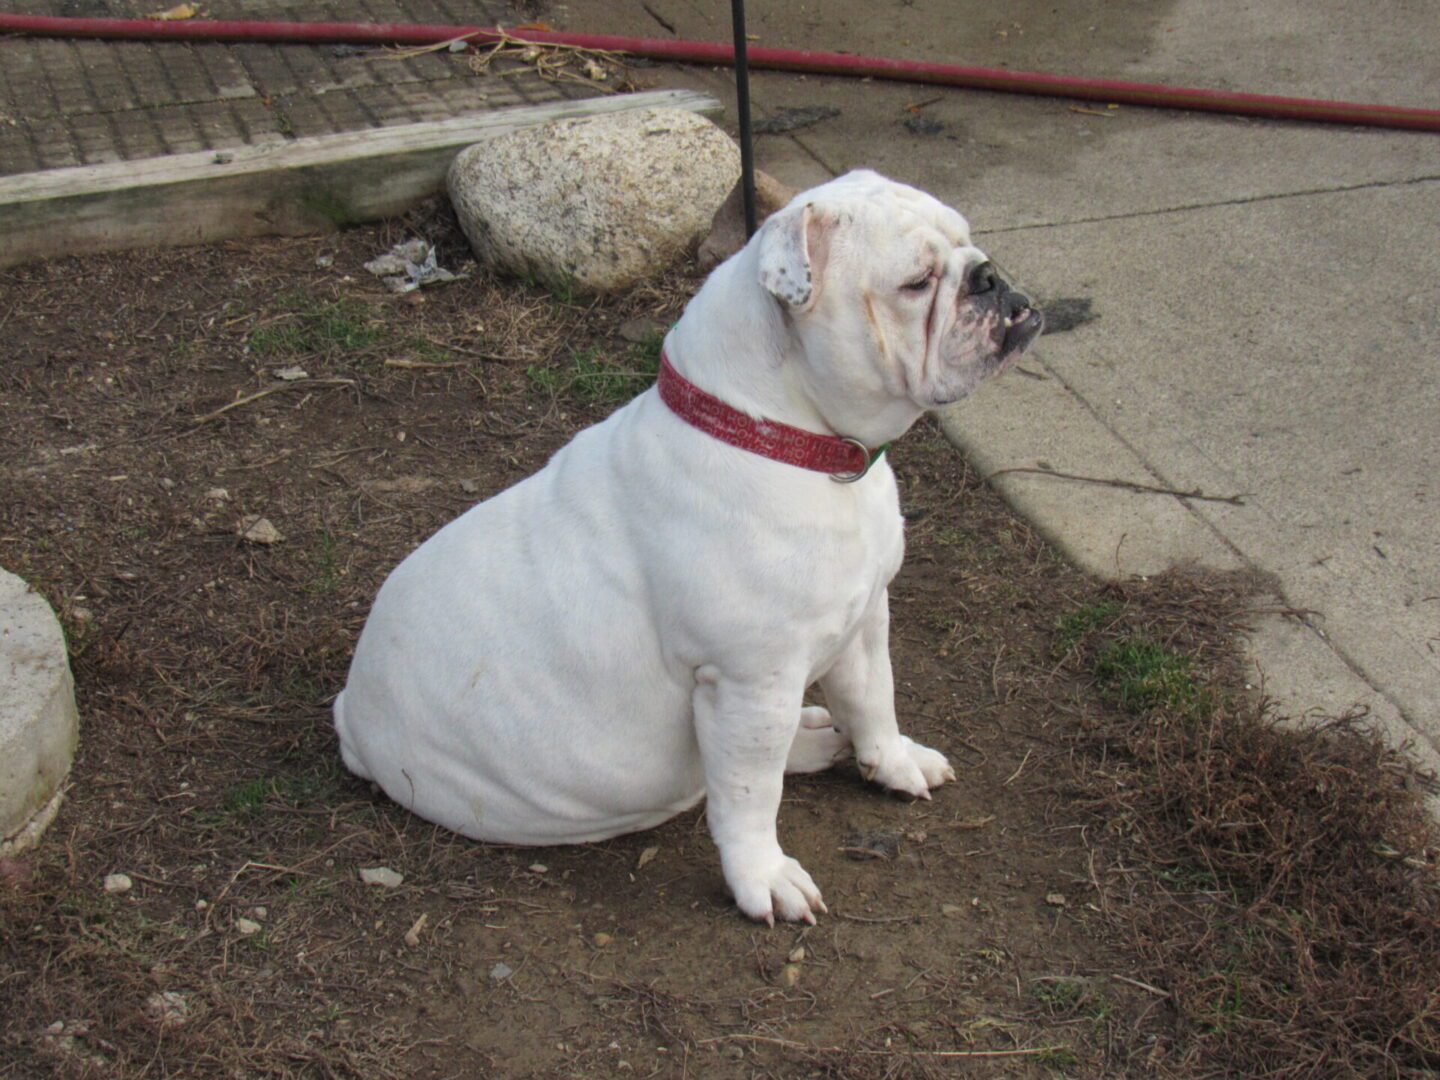 All White Bull Dog Sitting on a Lawn With a Red Leash